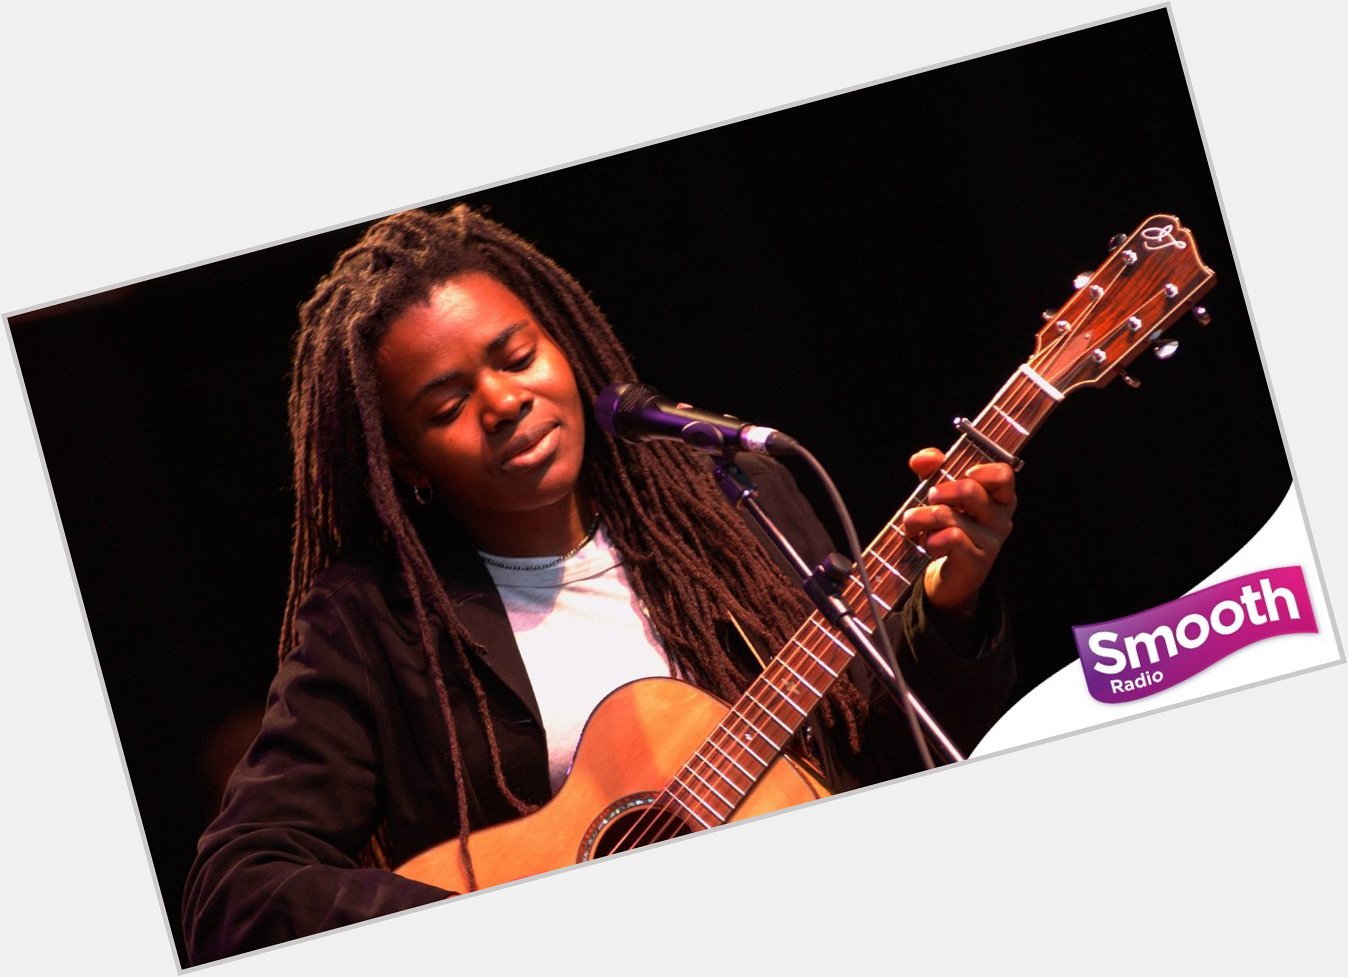 A big happy birthday to Tracy Chapman! The \Fast Car\ singer turns 57 today. 